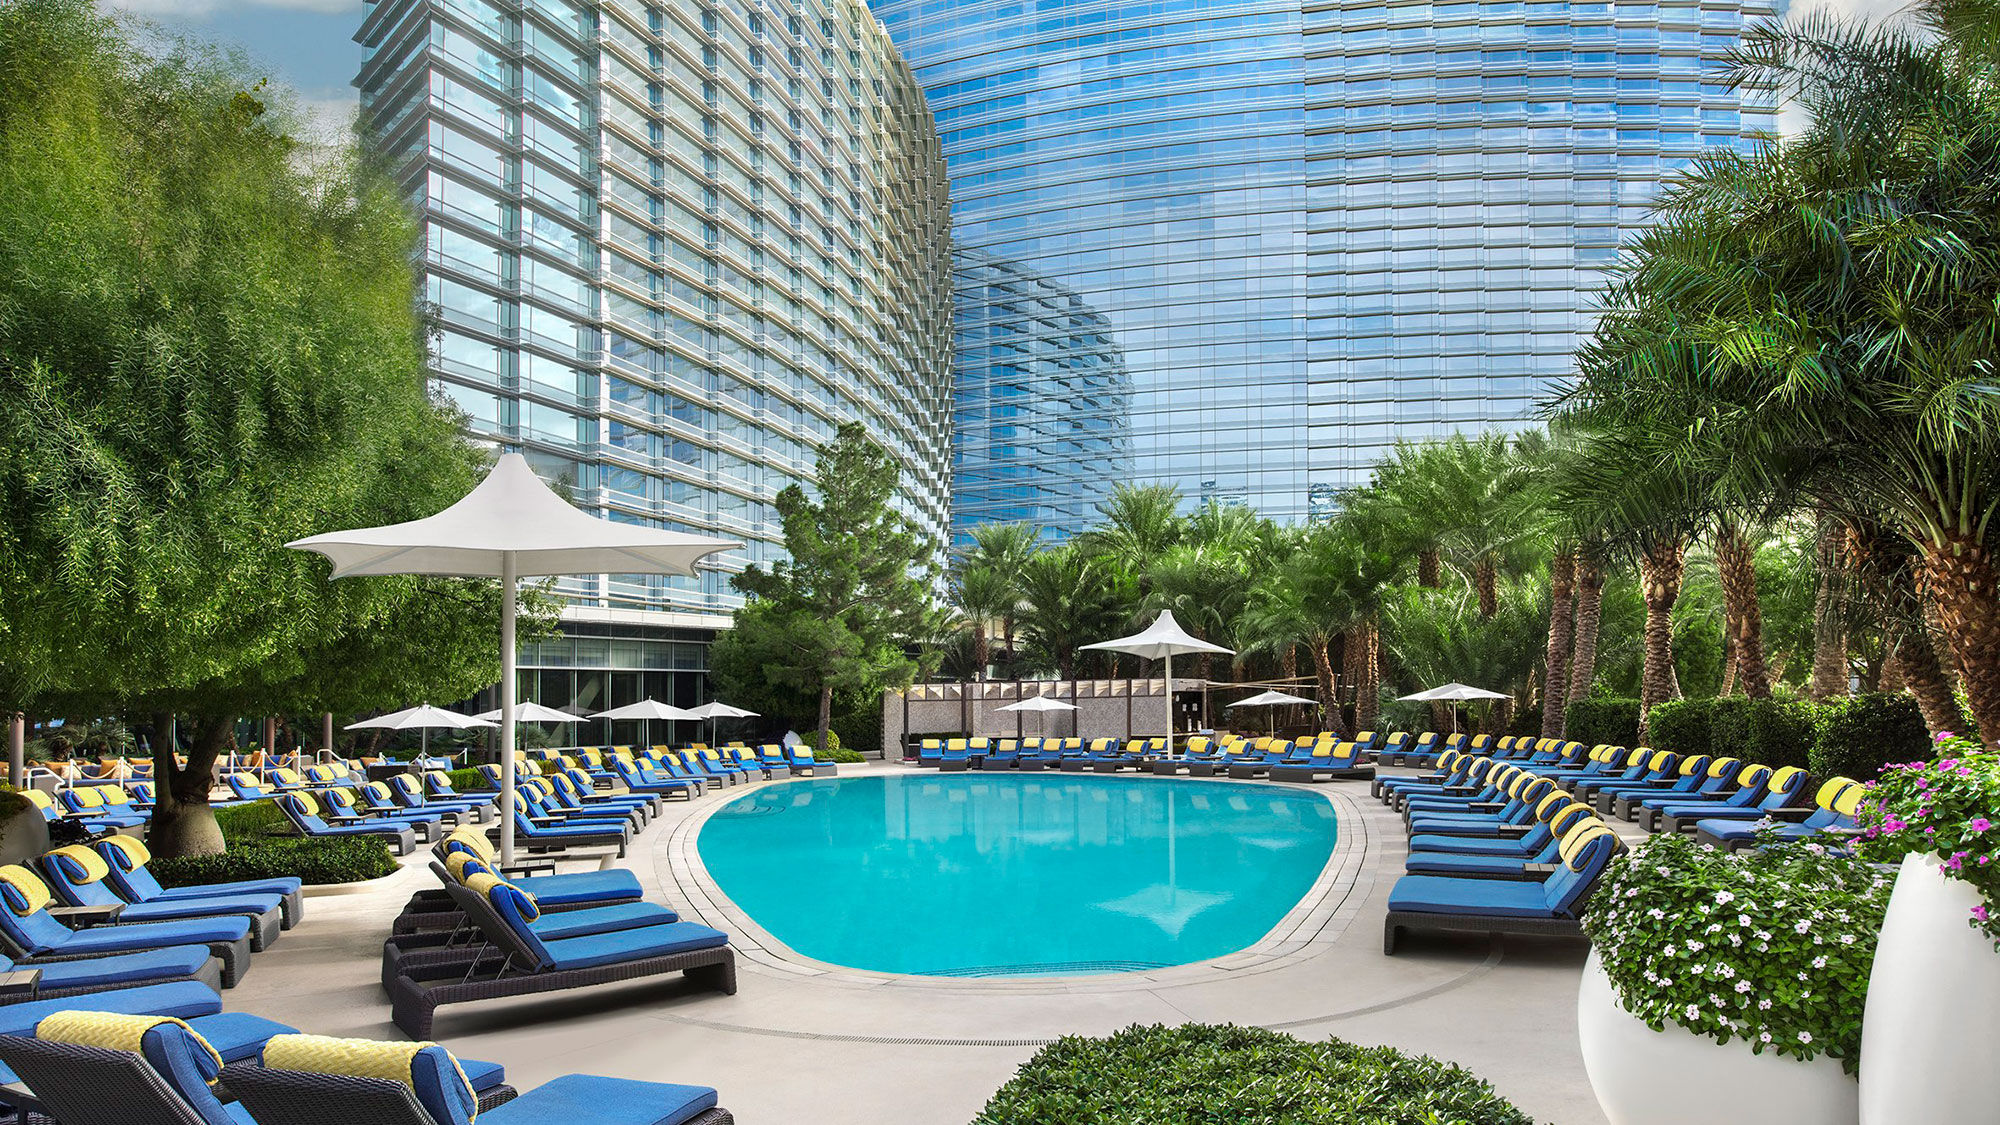 Aria's pool area unveiled an expanded pool bar this year. A renovated lounge space includes six TVs and a reimagined menu of refreshments.